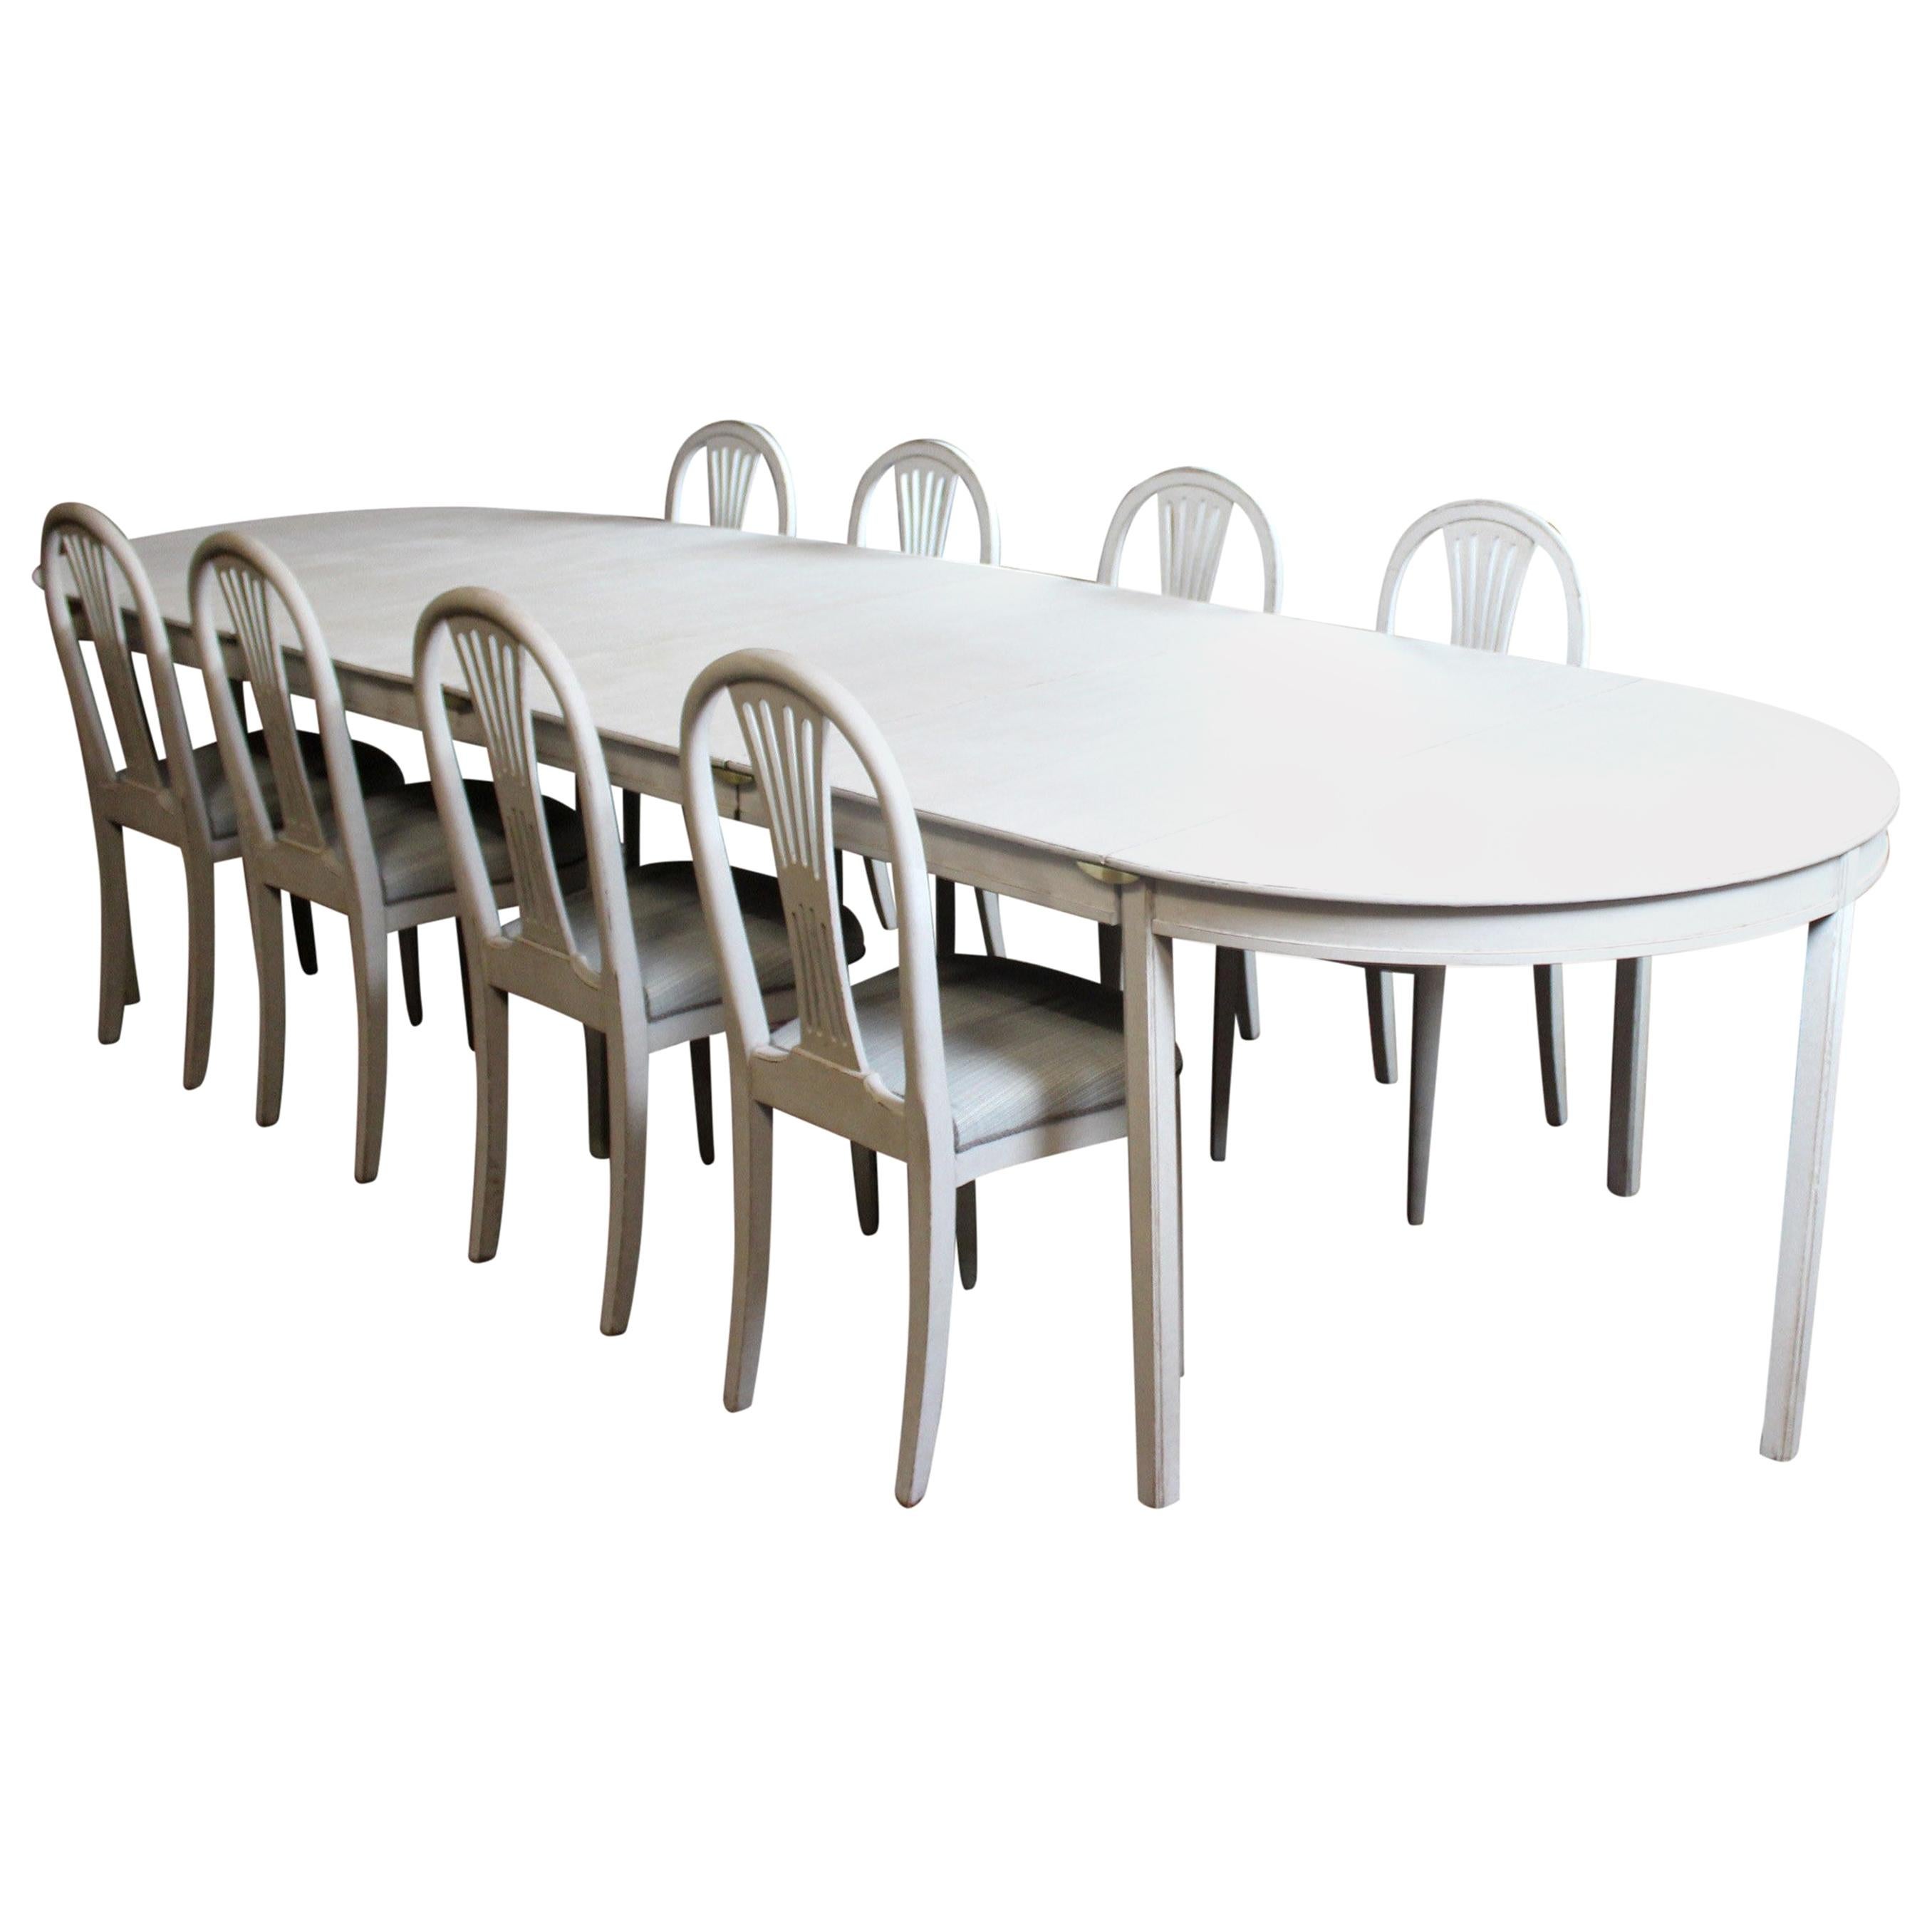 Grey Painted Gustavian Dining Set with Dining Table and Chairs